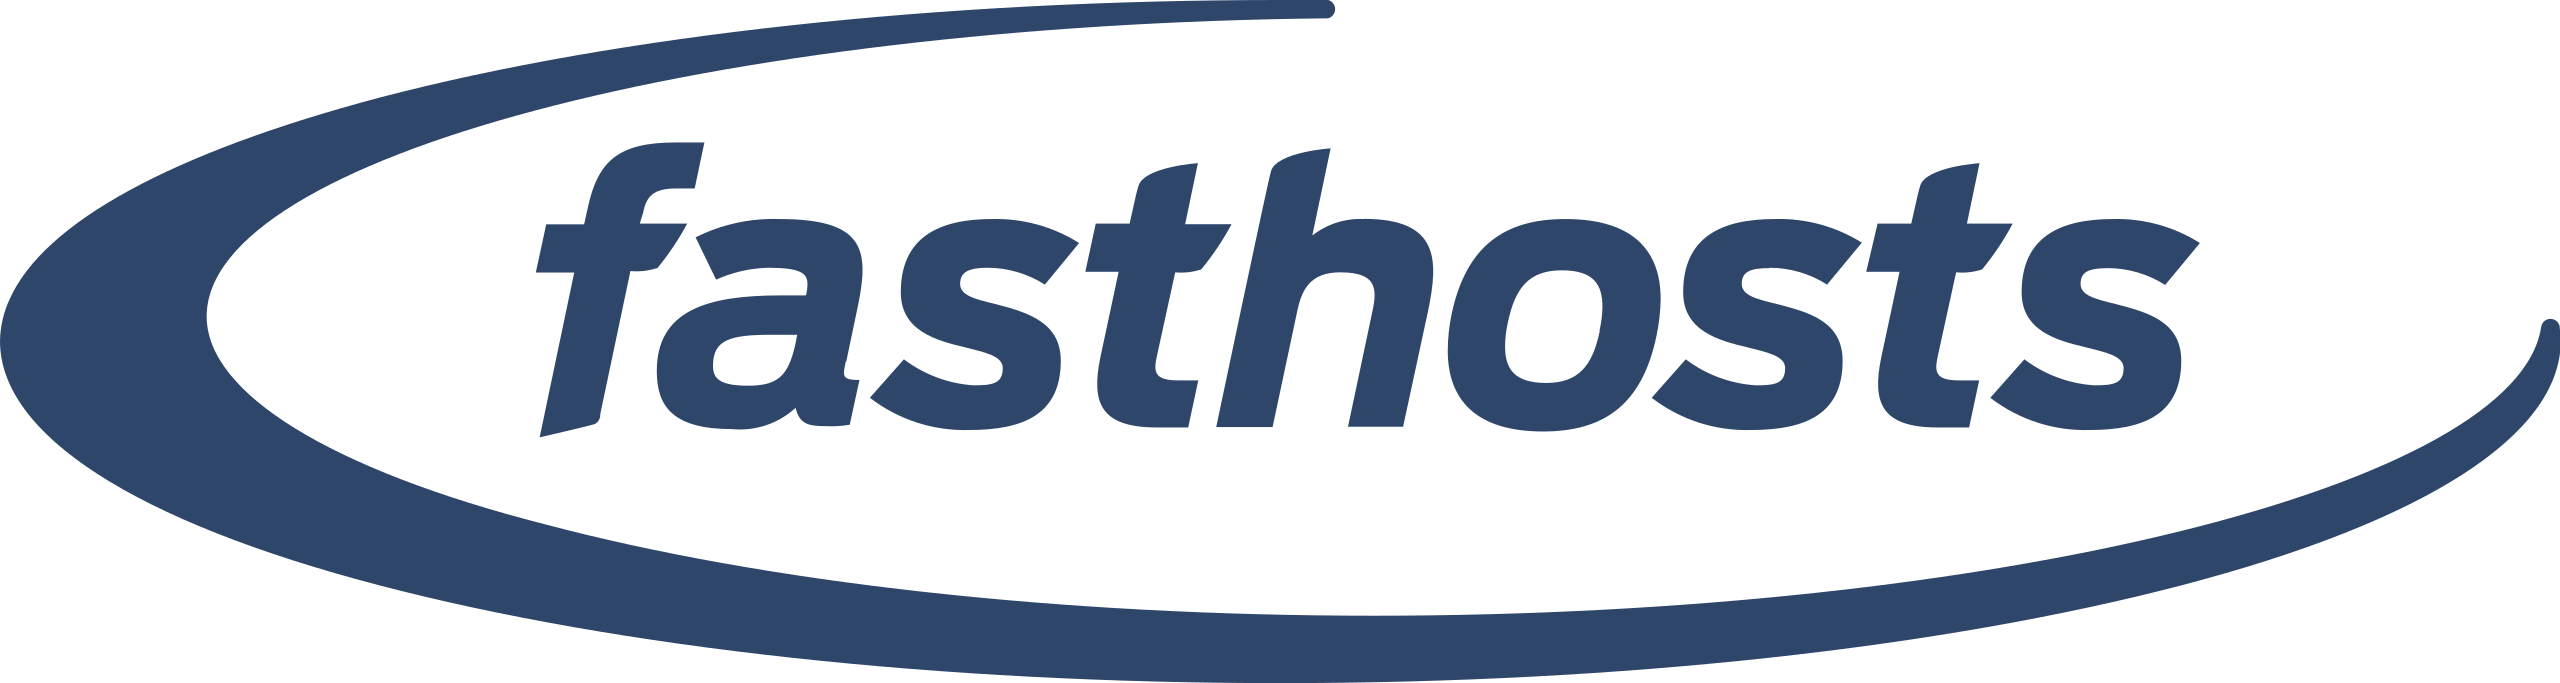 file: fasthosts-logo.svg - wikimedia commons